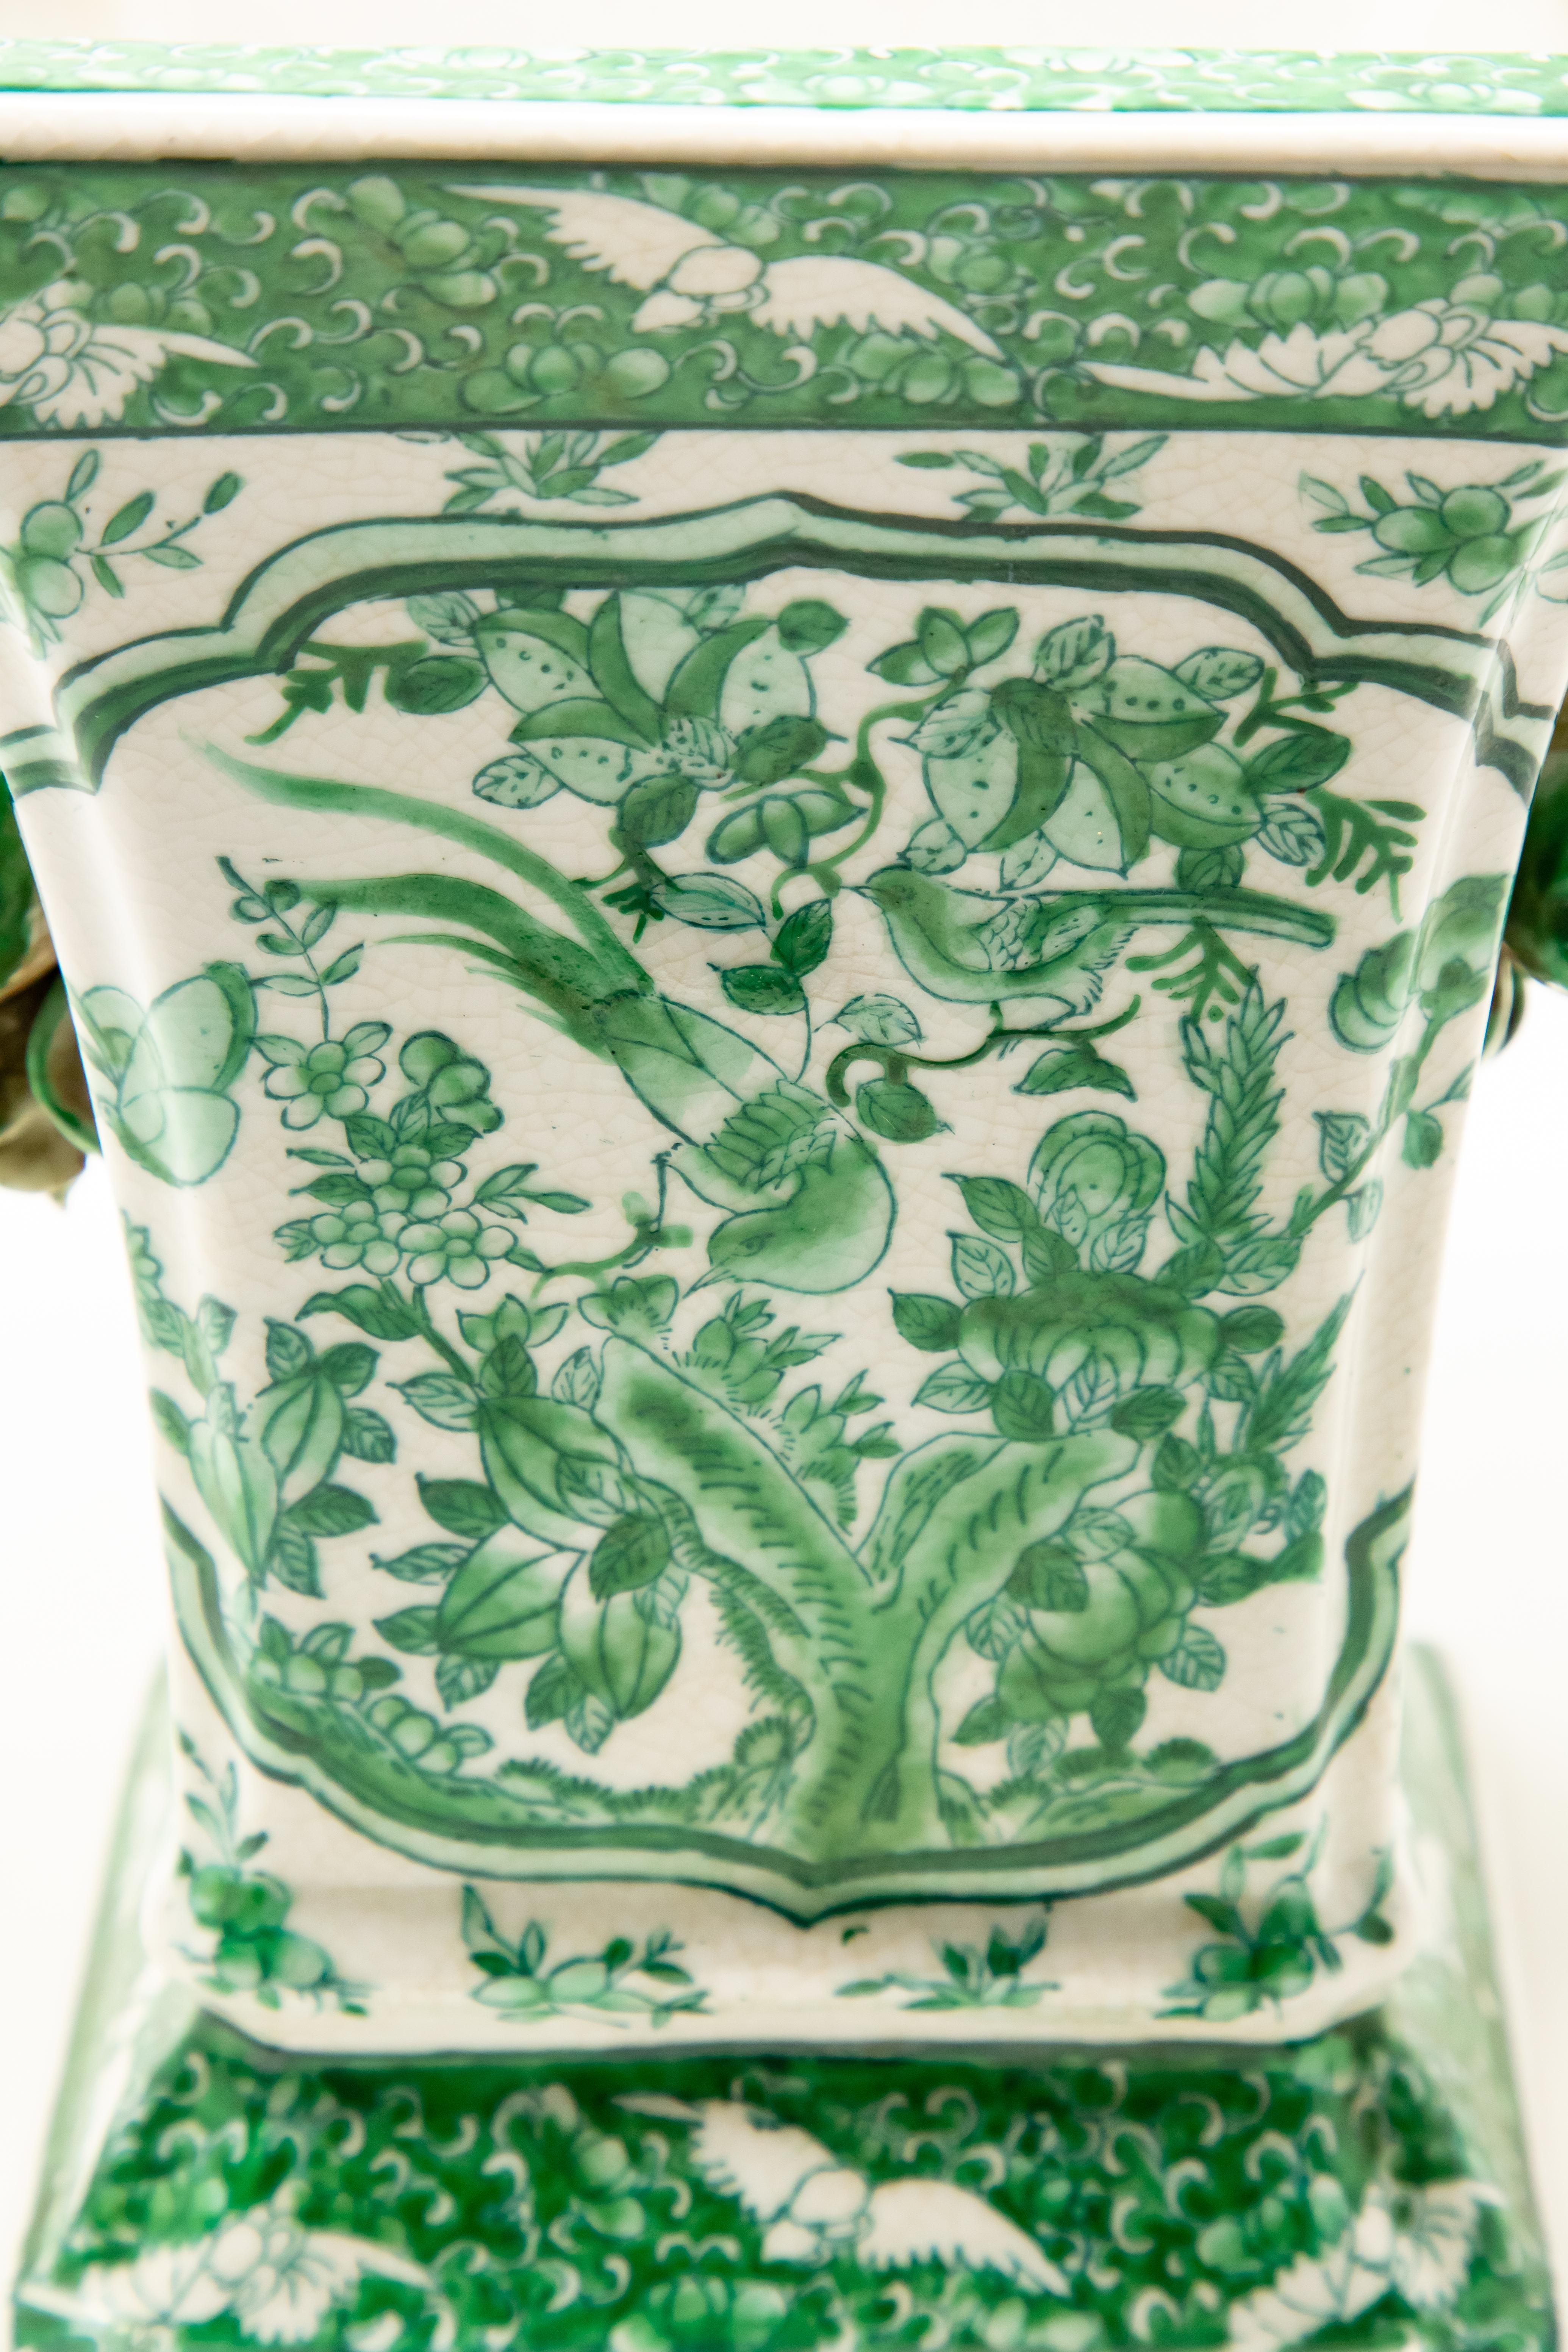 Chinese Export Green and White Porcelain Vase